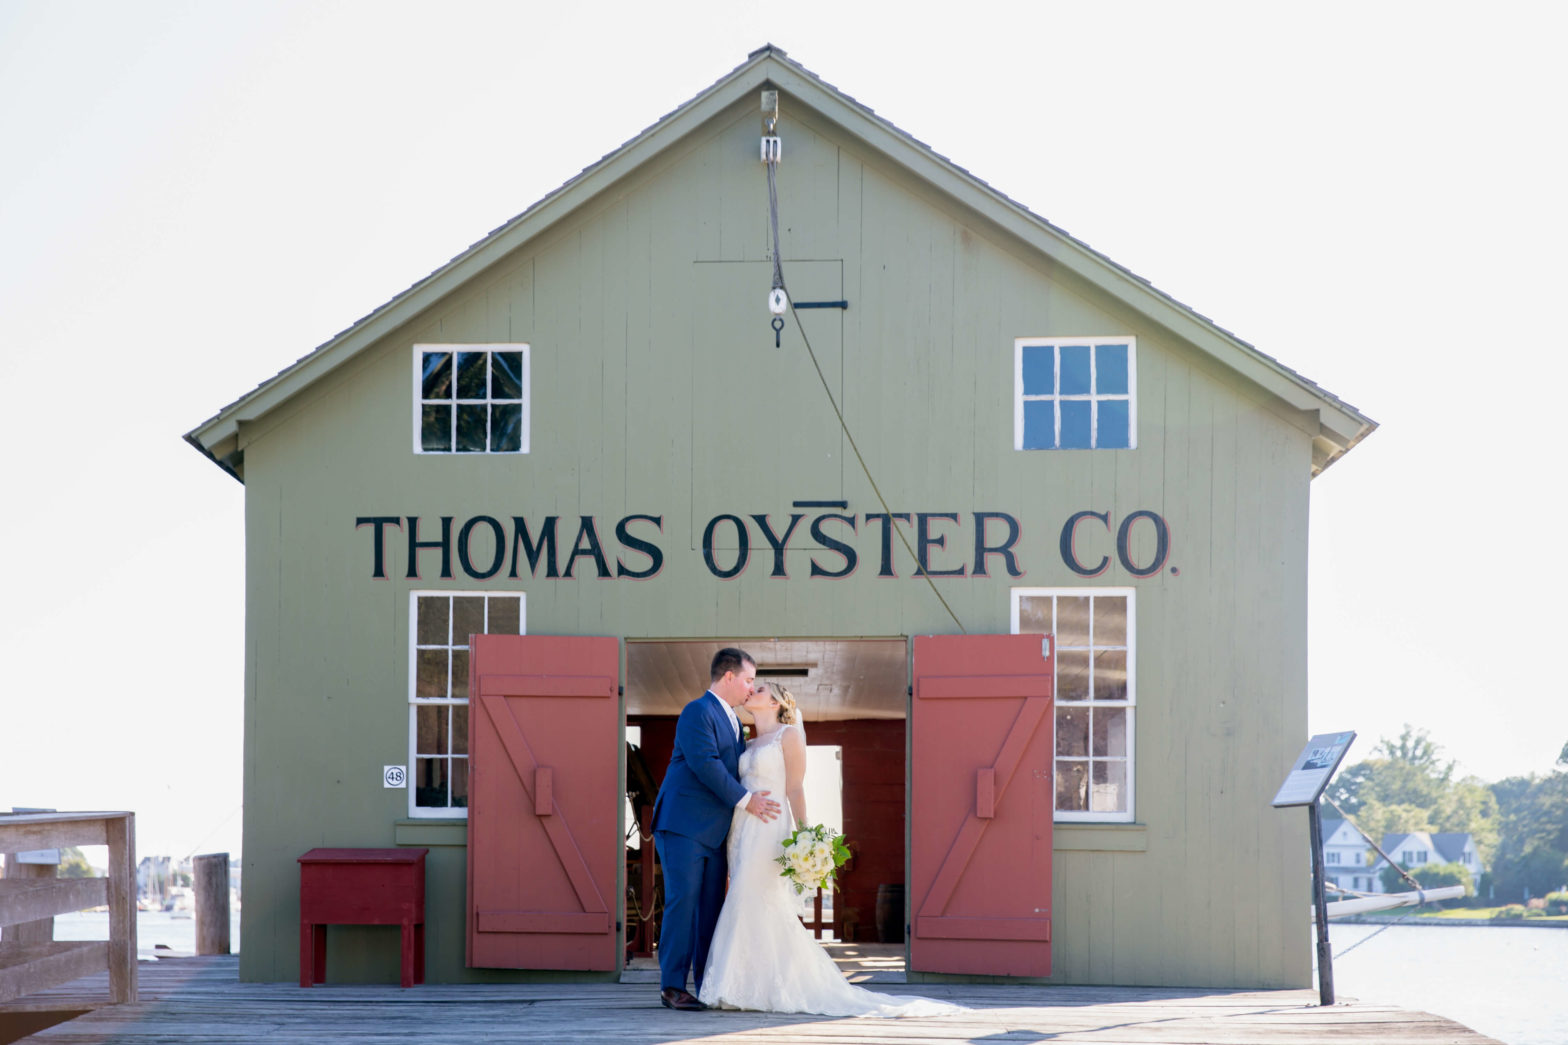 Mystic Seaport Museum Wedding featuring the Thomas Oyster Co.